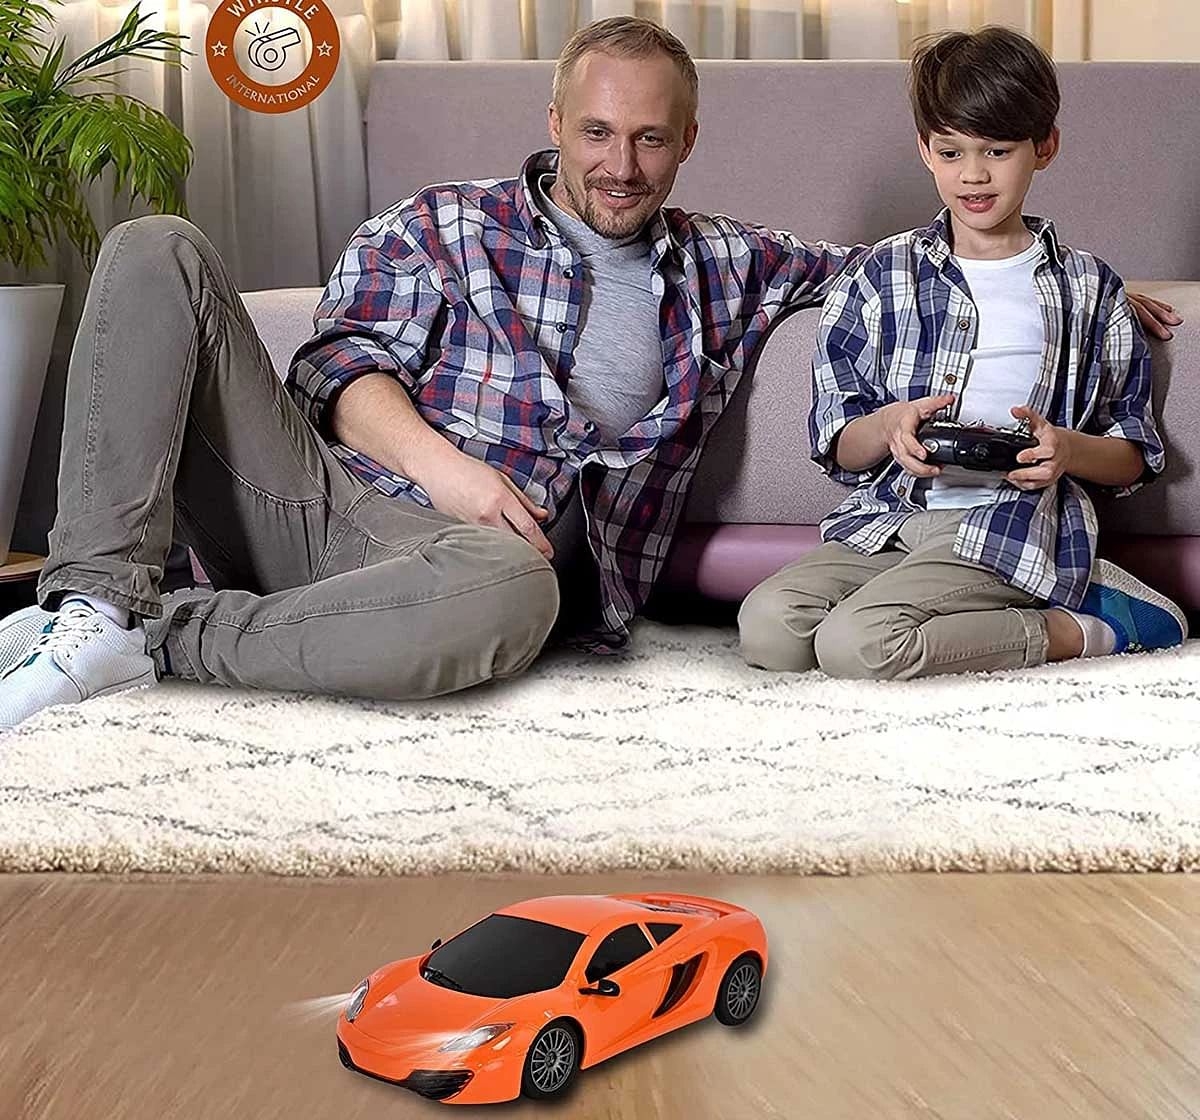 Rowan 1:24 Scale Remote Control High Speed Car for Kids 2Y+, Orange and Black